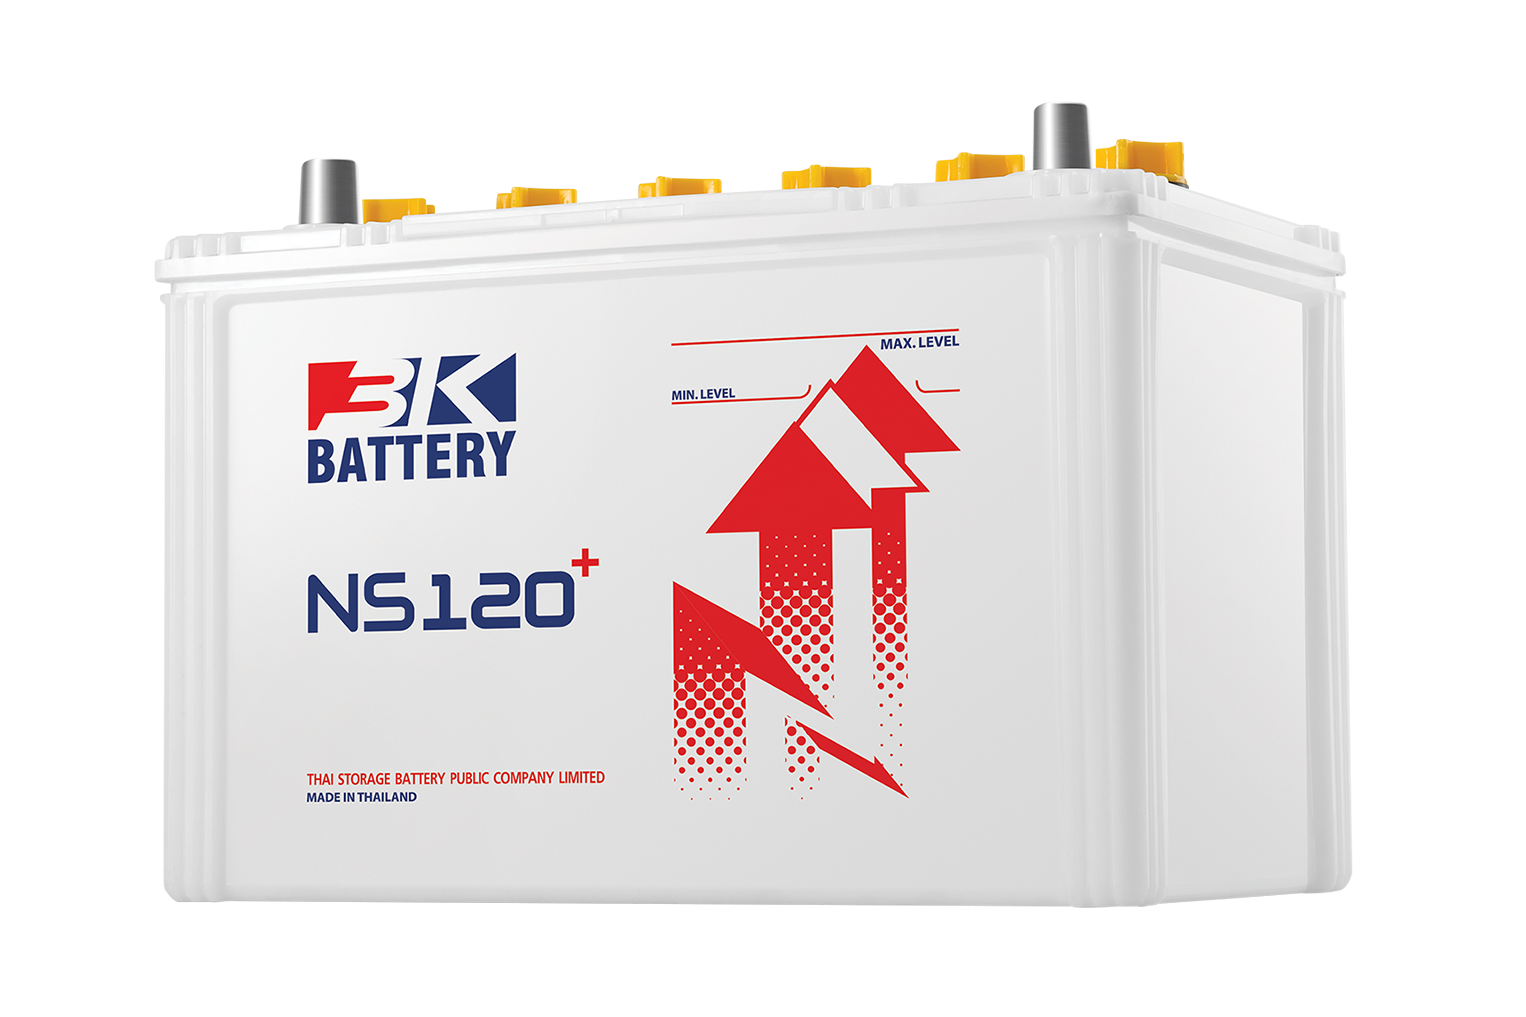 Battery 3K NS120 (Conventional Type) 12V 85Ah